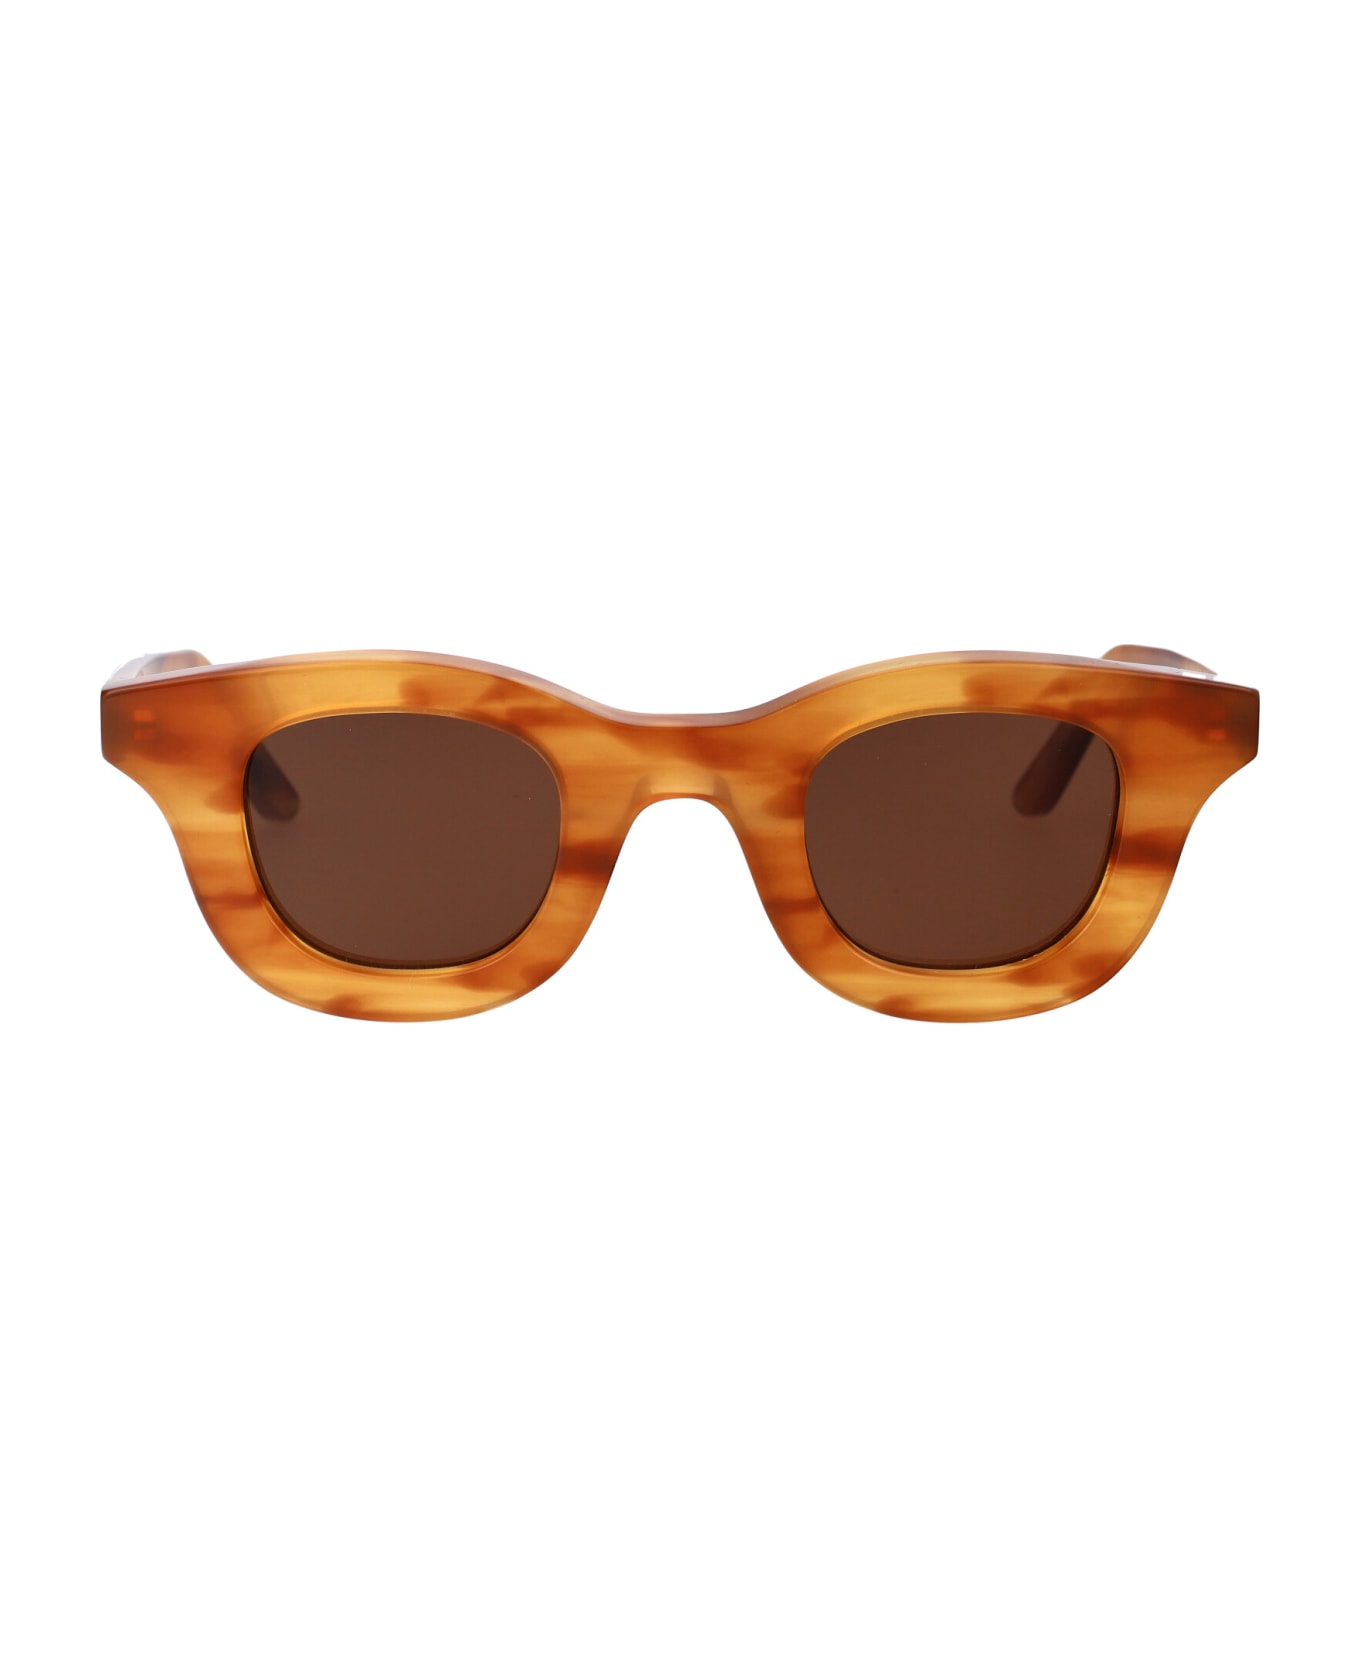 Thierry Lasry Hacktivity Sunglasses - 117 BROWN